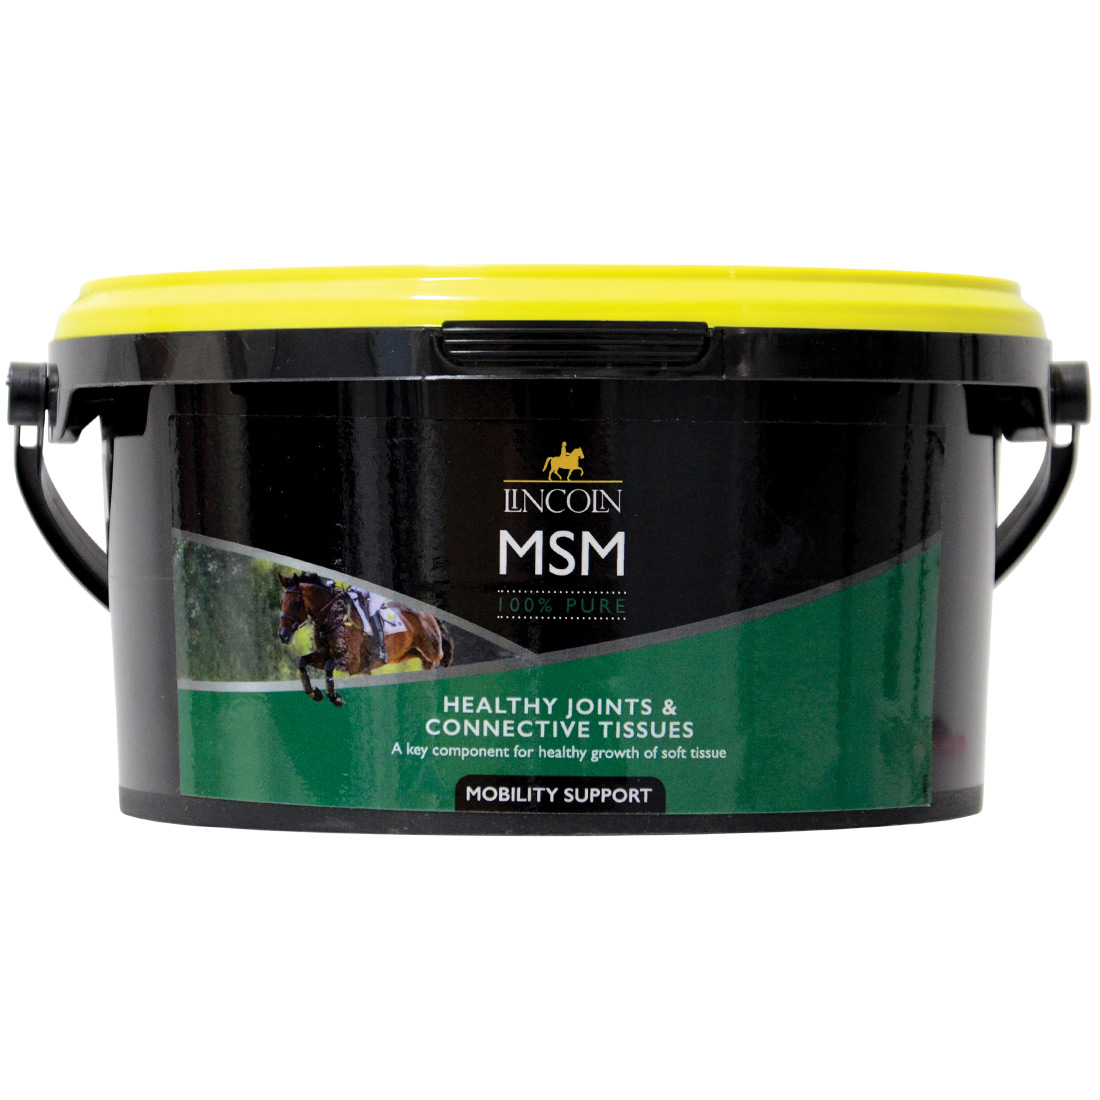 Lincoln Pure MSM – 1.5kg